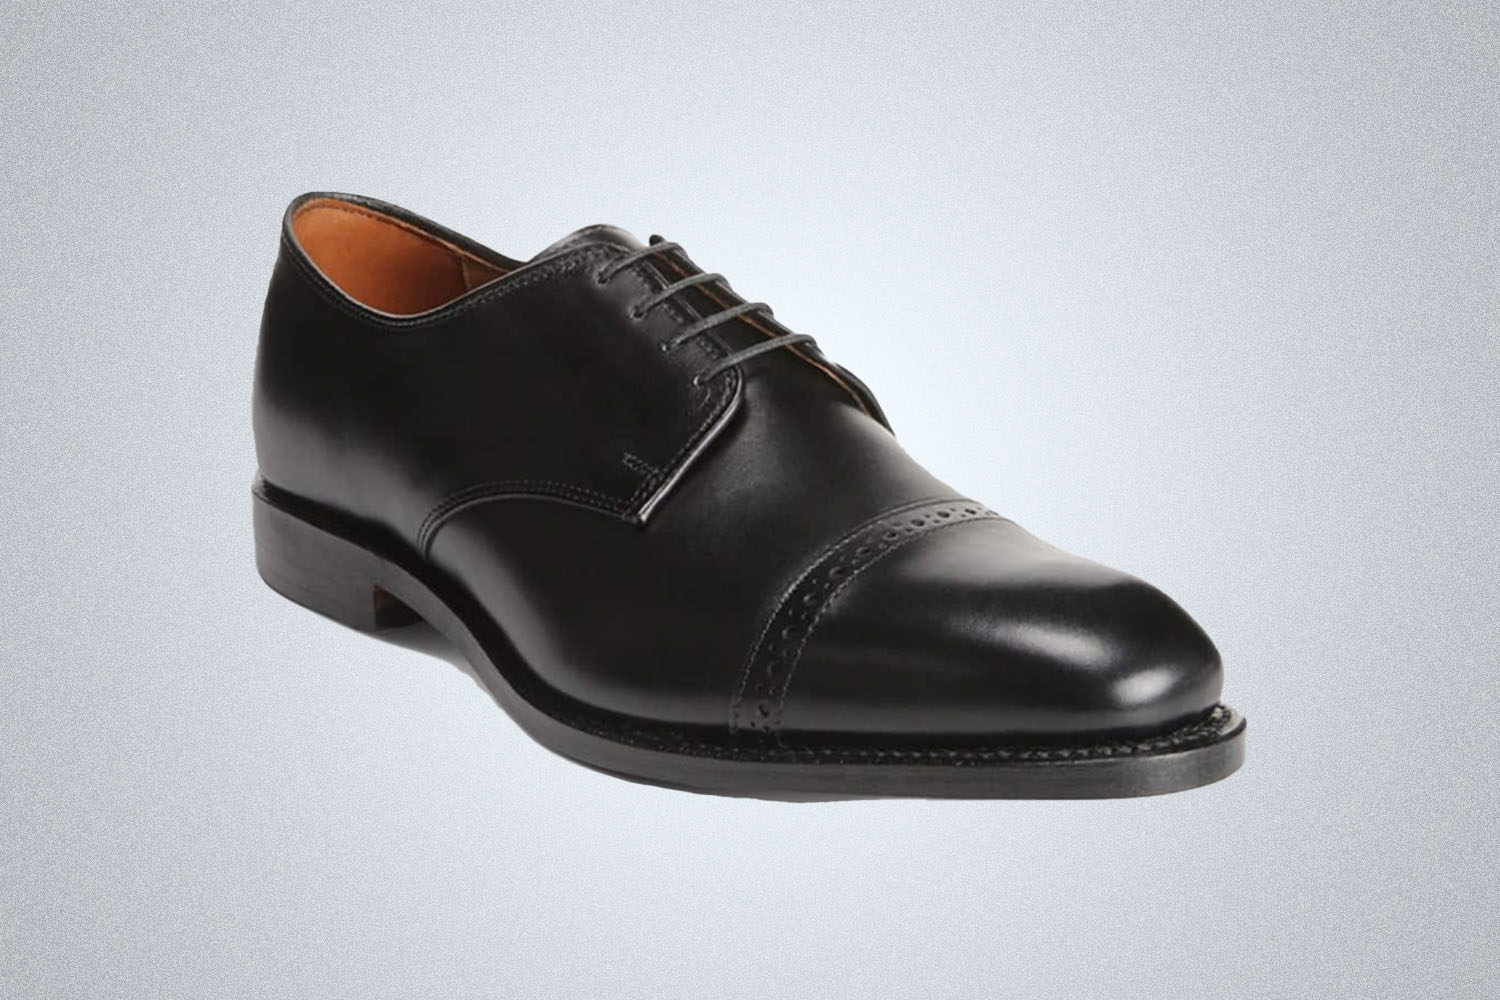 A black pair of Allen Edmonds Oxford shoes on a grey background